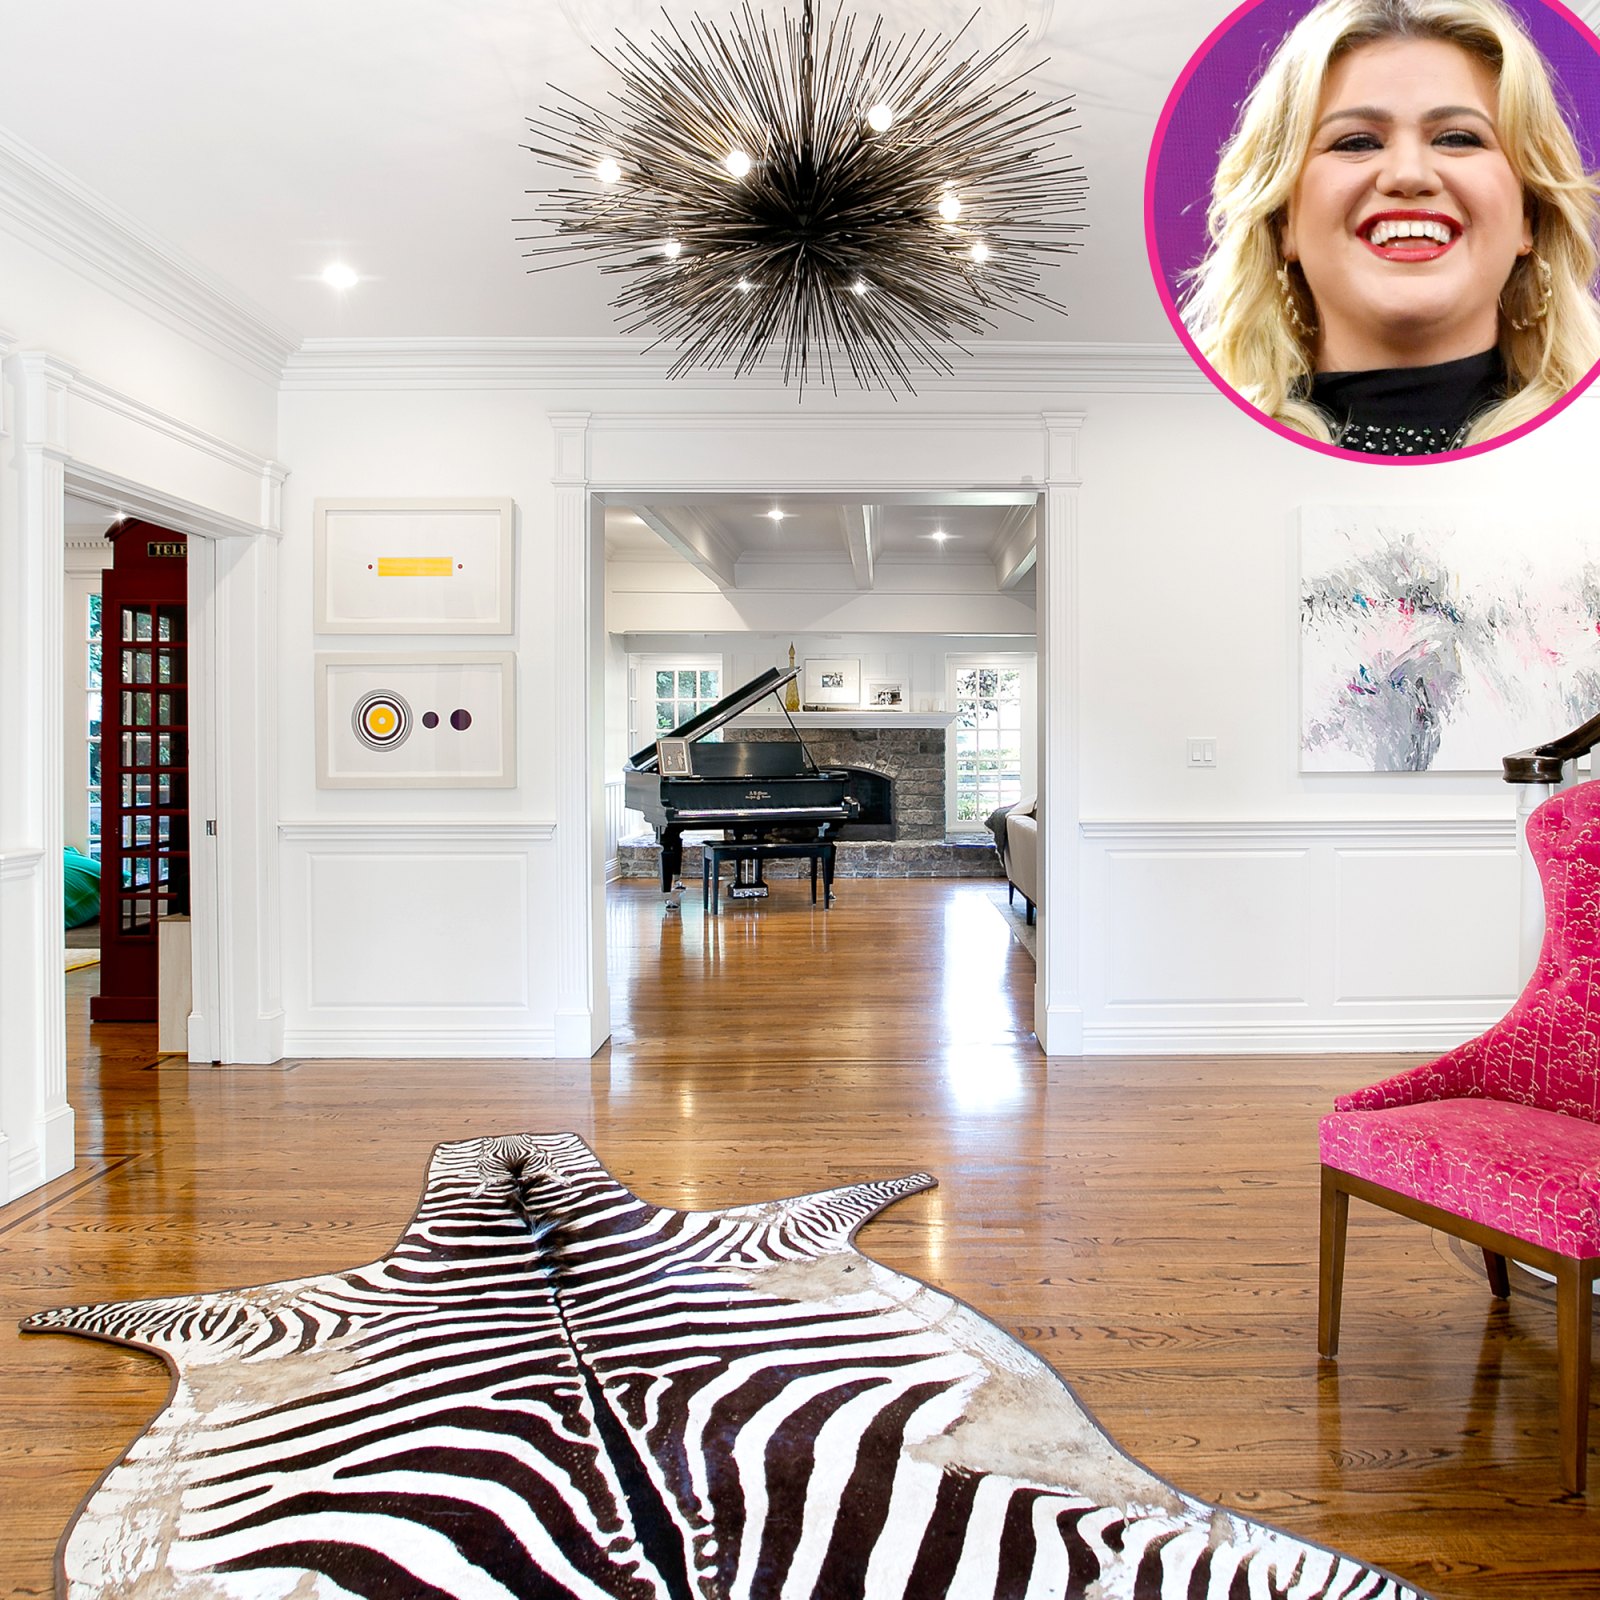 Kelly Clarkson Moves Into New Home Post-Divorce 